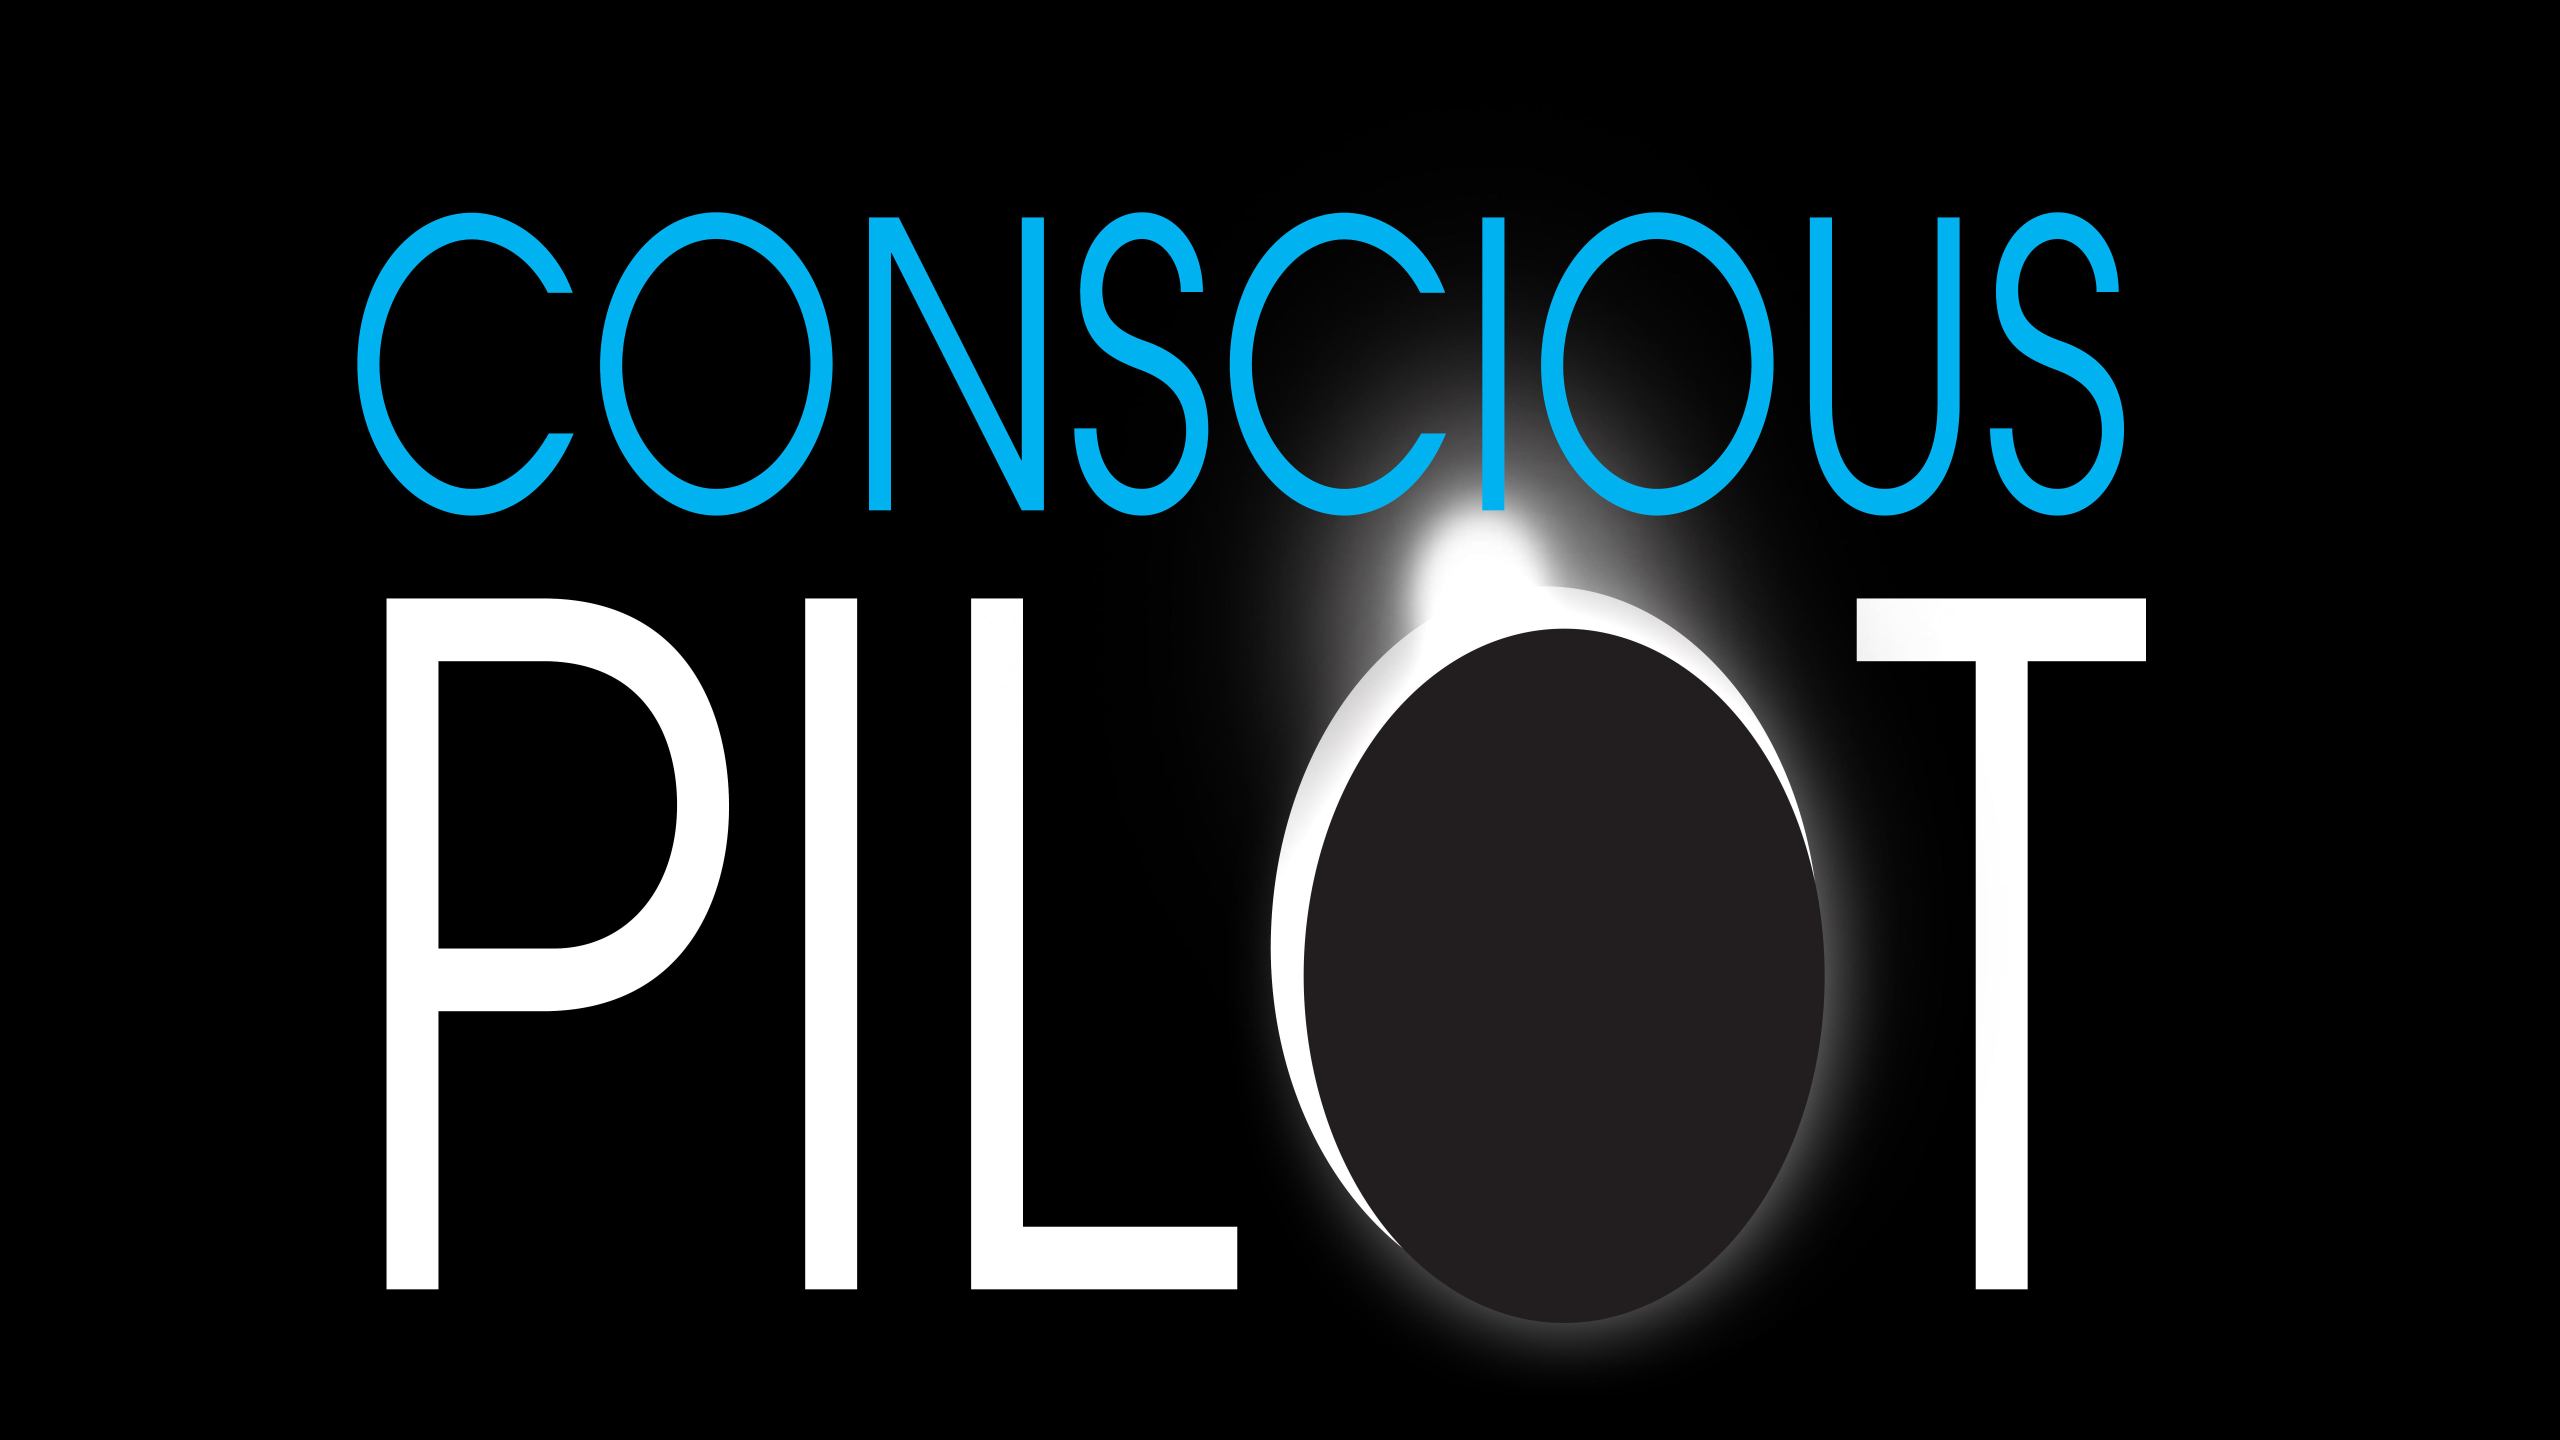 Conscious Pilot! Keep up with NEW’s Premiere Classic Rock Band!